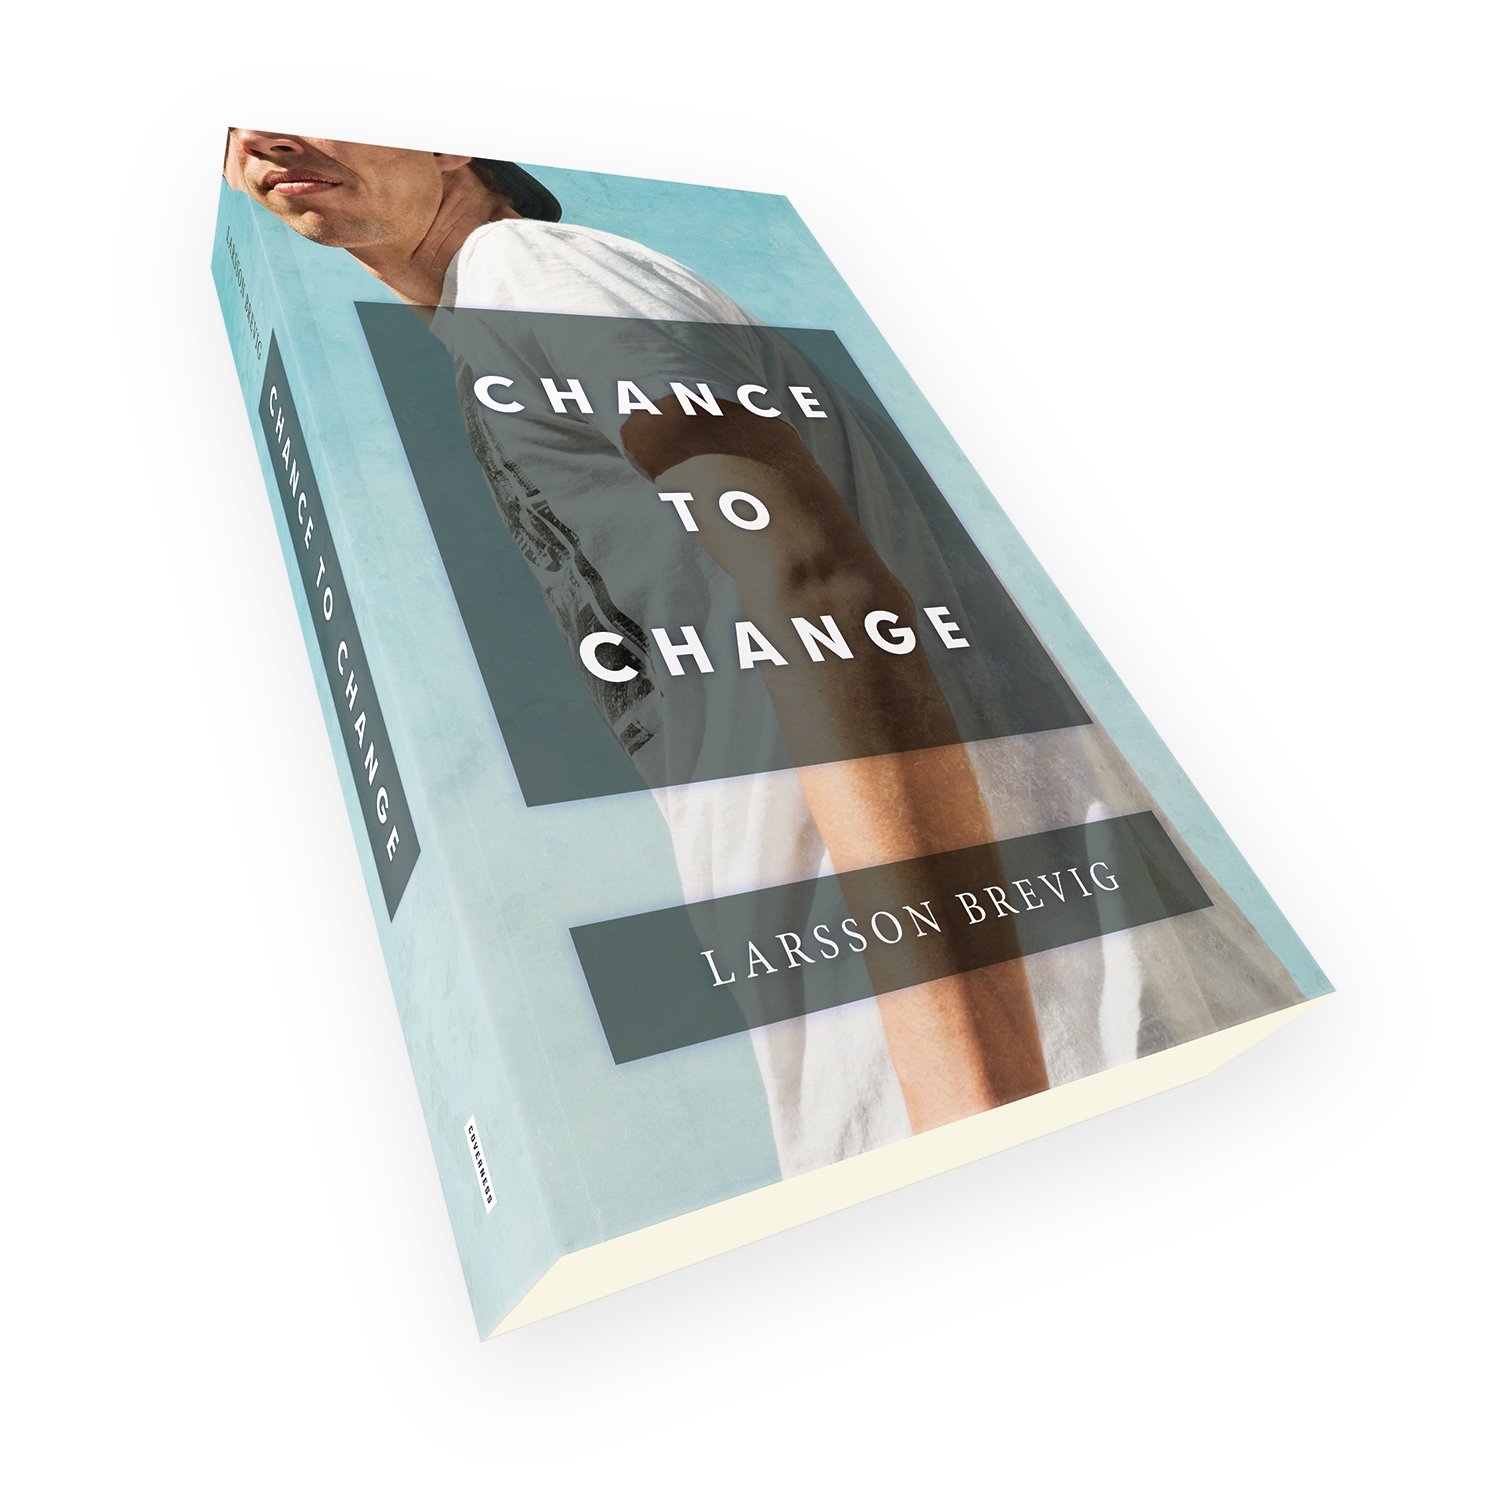 'Chance to Change' is a bespoke cover design for a modern dramatic novel. The book cover was designed by Mark Thomas, of coverness.com. To find out more about my book design services, please visit www.coverness.com.